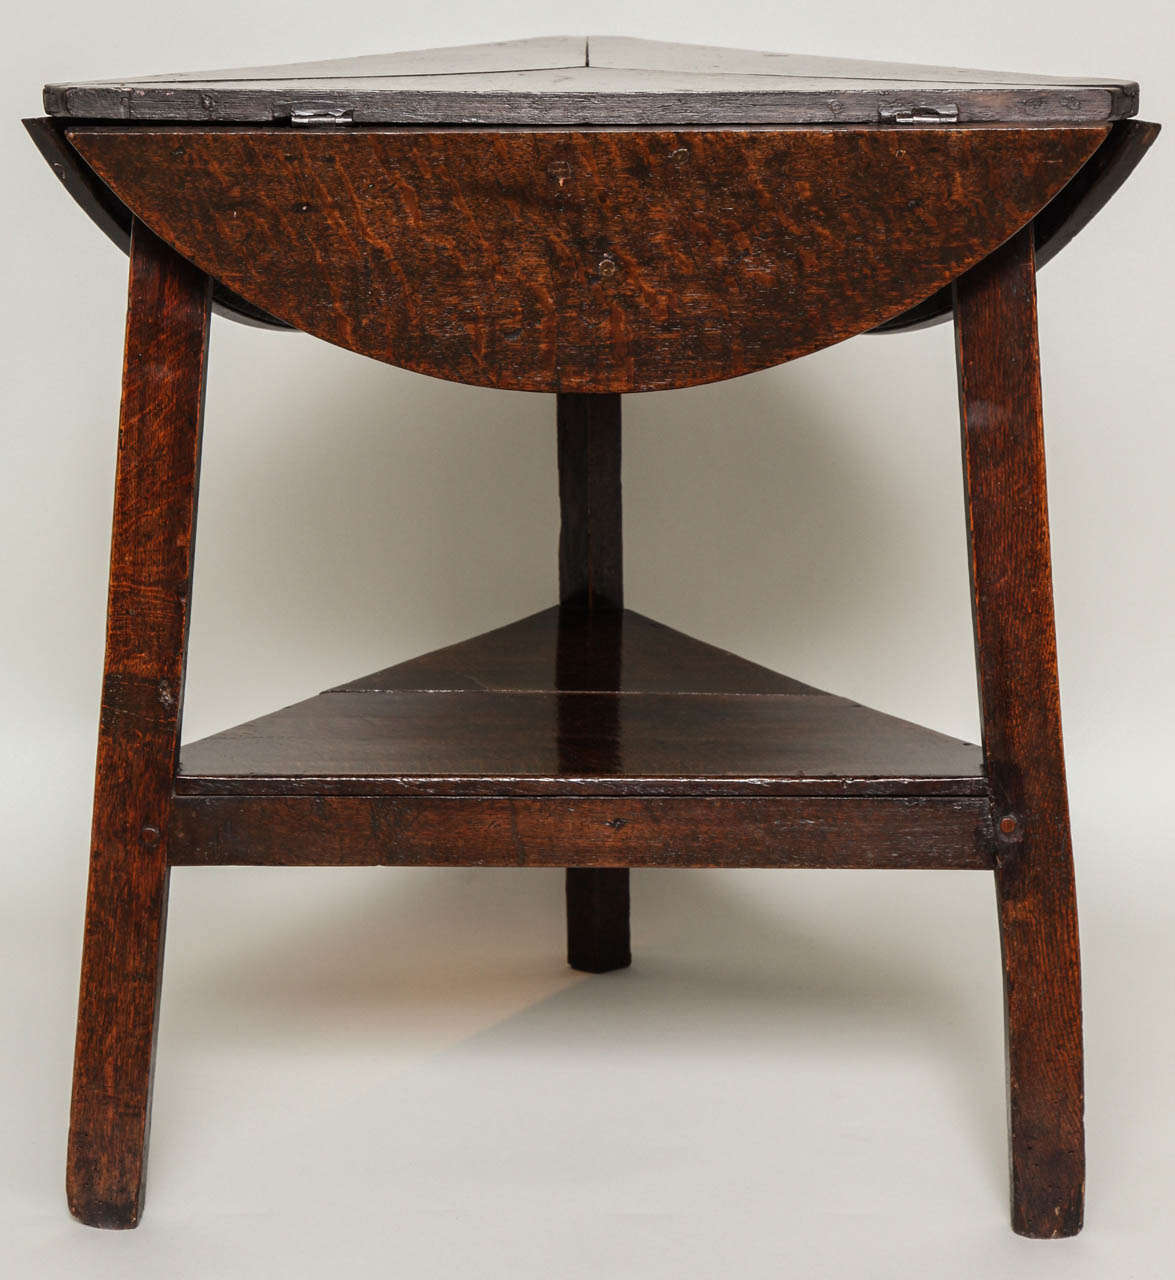 Rare 18th Century English or Welsh drop leaf cricket table, the triangular/round top of segmented construction, the top swiveling to be either shape, over splay leg base having square chamfered legs joined by lower shelf, the whole with good color